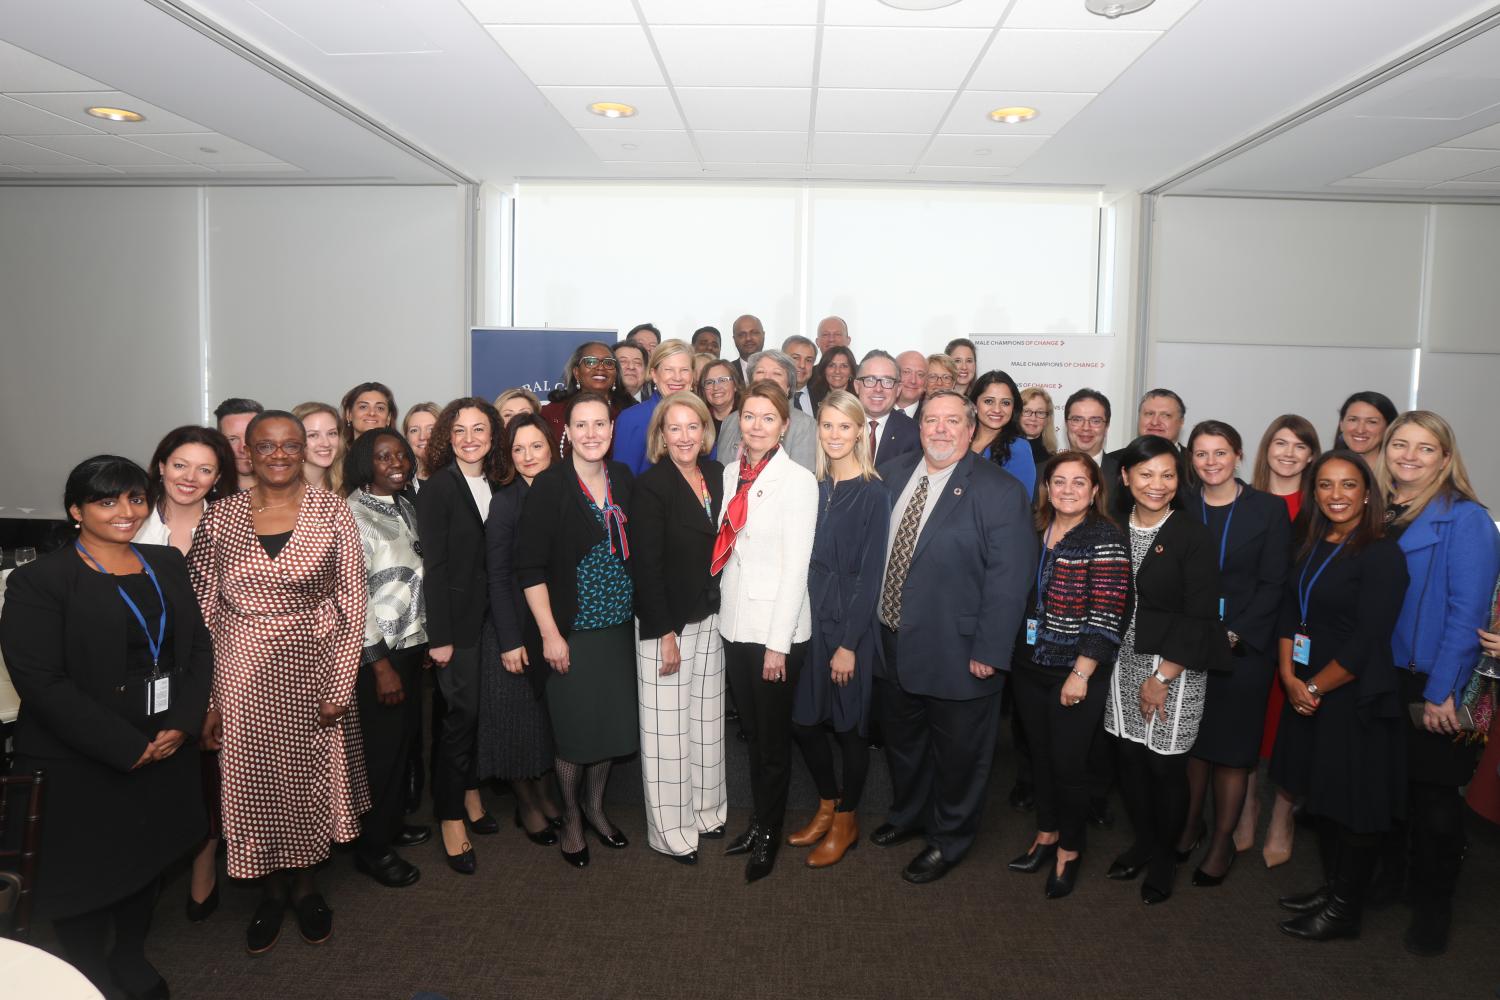 Today, leaders will convene for a CEO roundtable at the UN to find ways to advance gender equality at a time when many efforts to boost diversity confront an ongoing backlash.